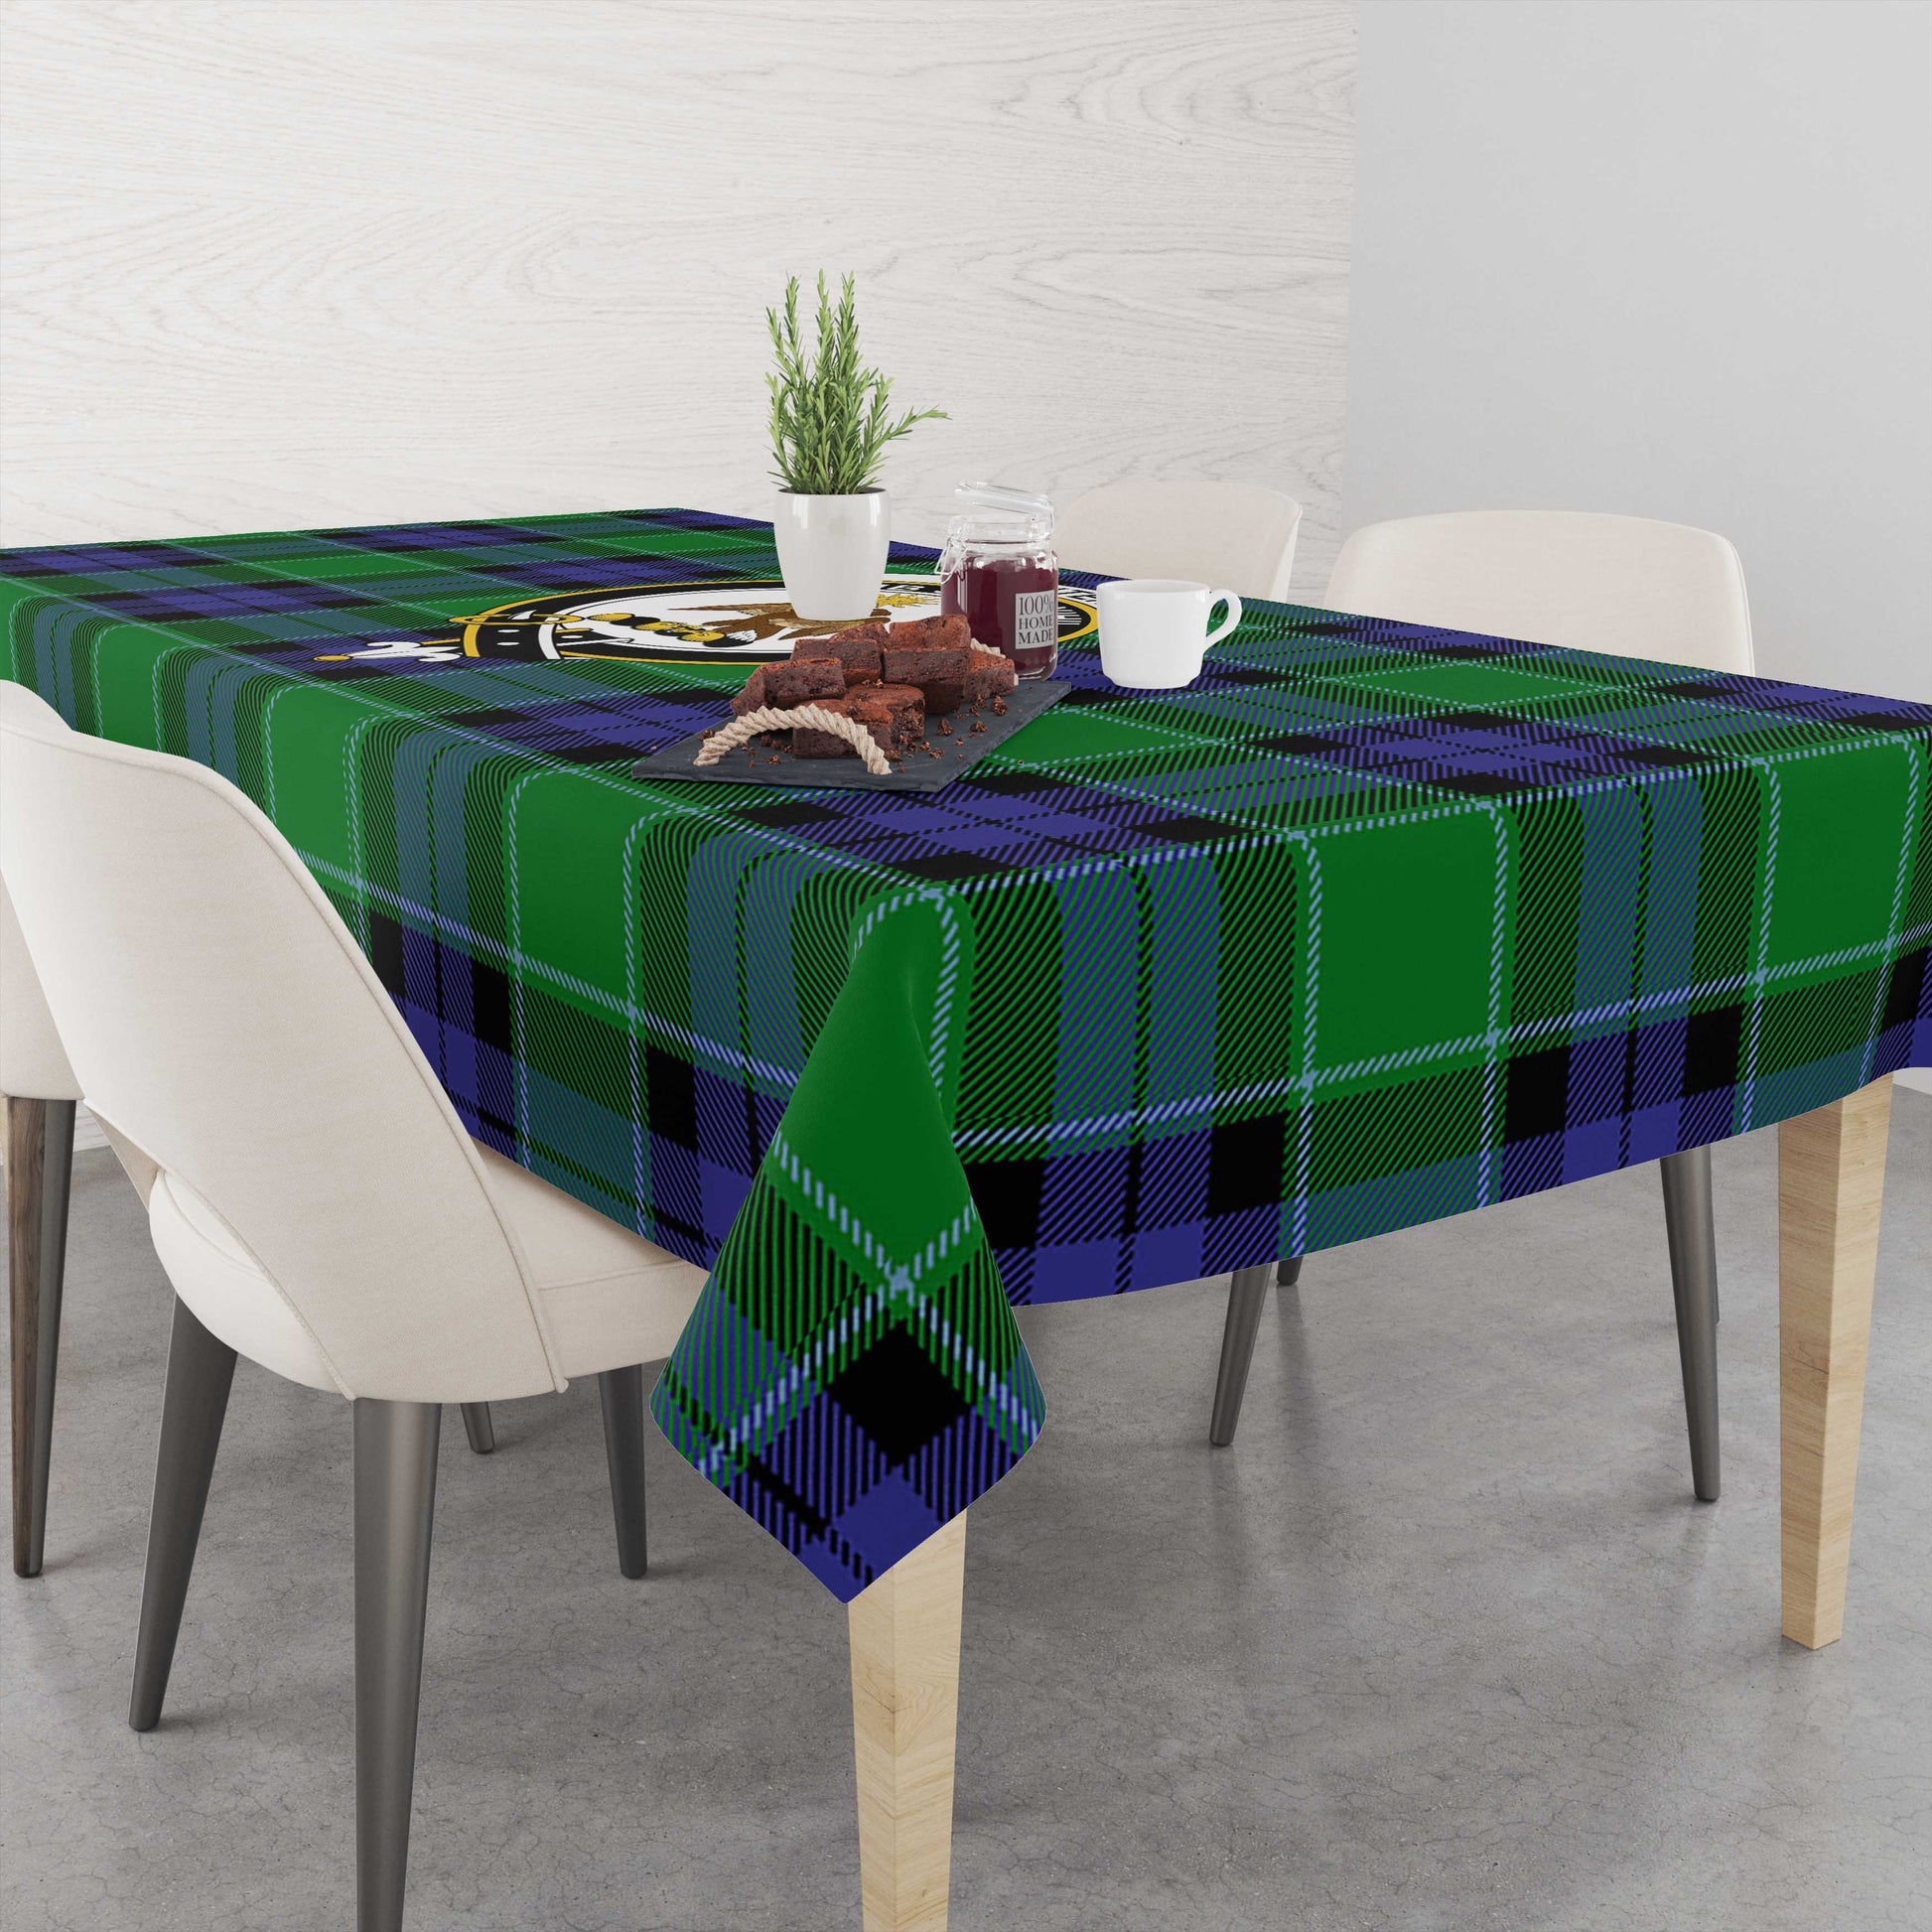 monteith-tatan-tablecloth-with-family-crest